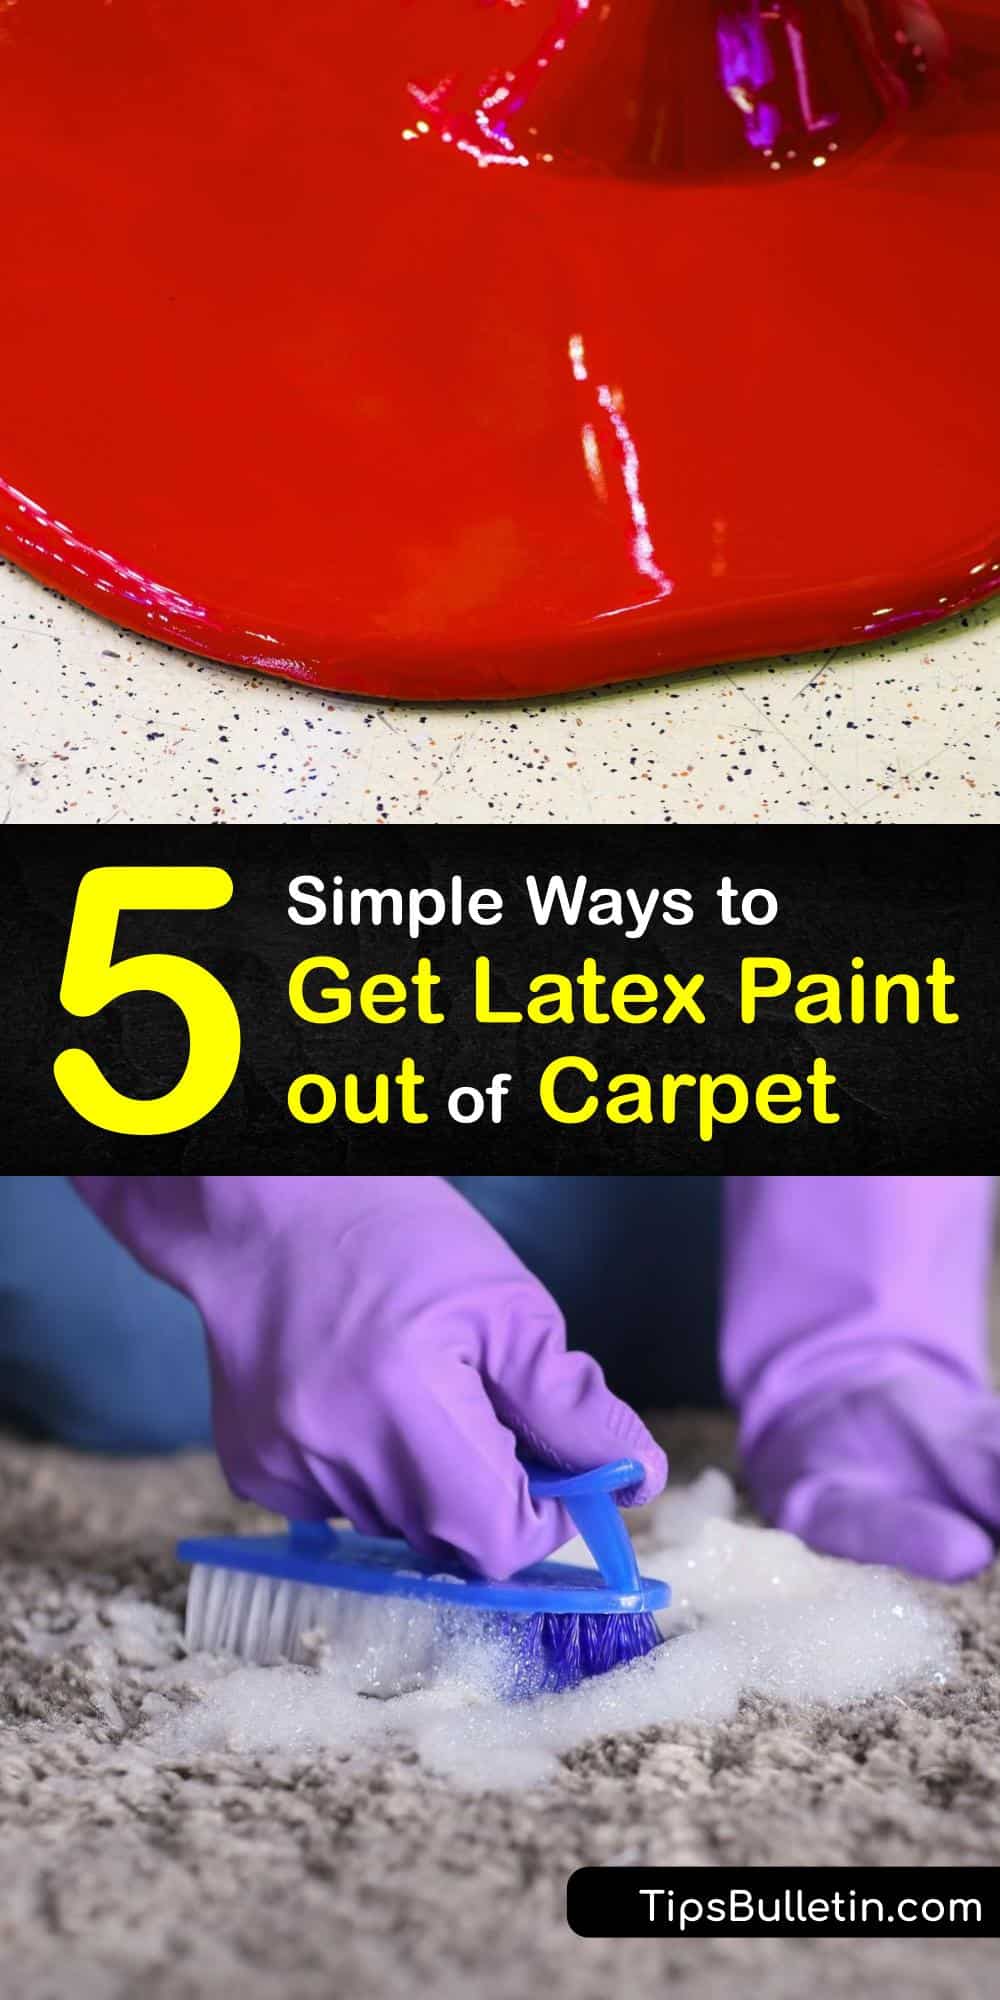 5 Simple Ways to Get Latex Paint out of Carpet